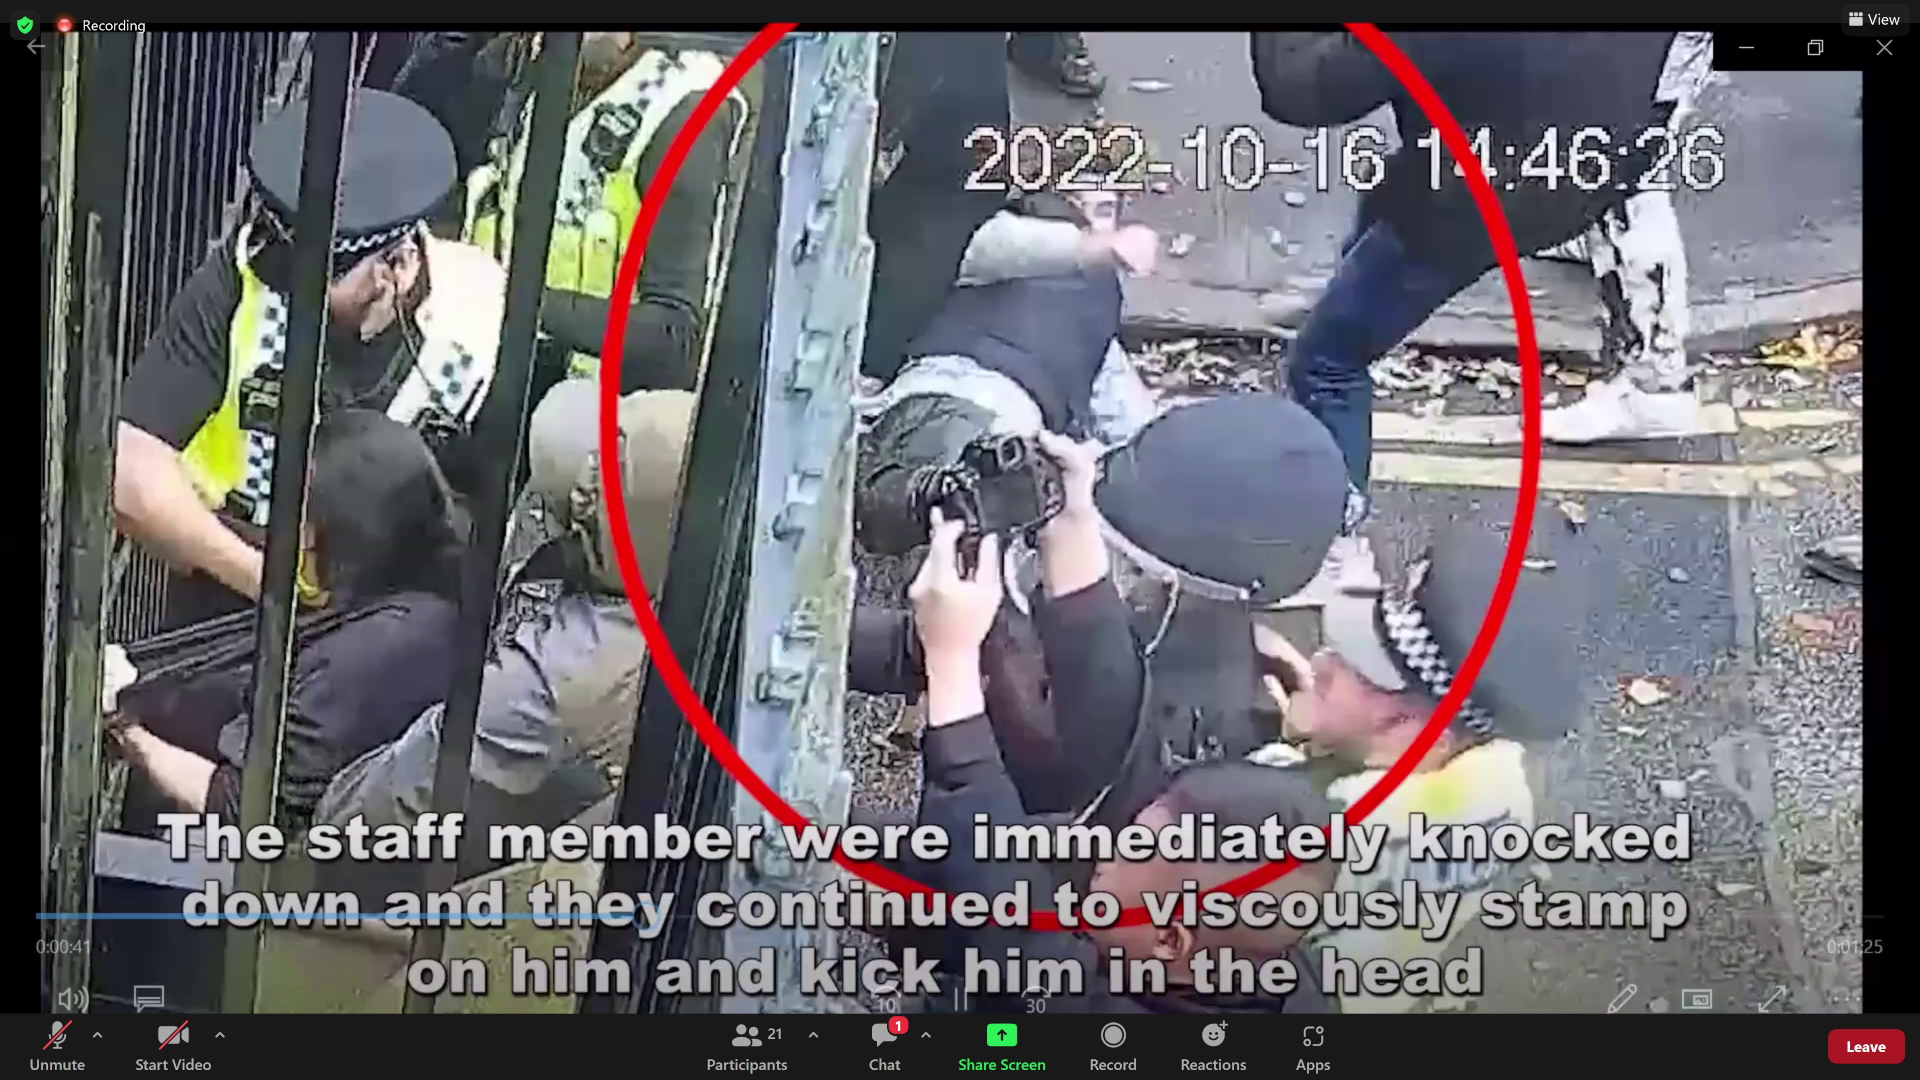 Video appears to show the man being kicked on the ground by masked protesters